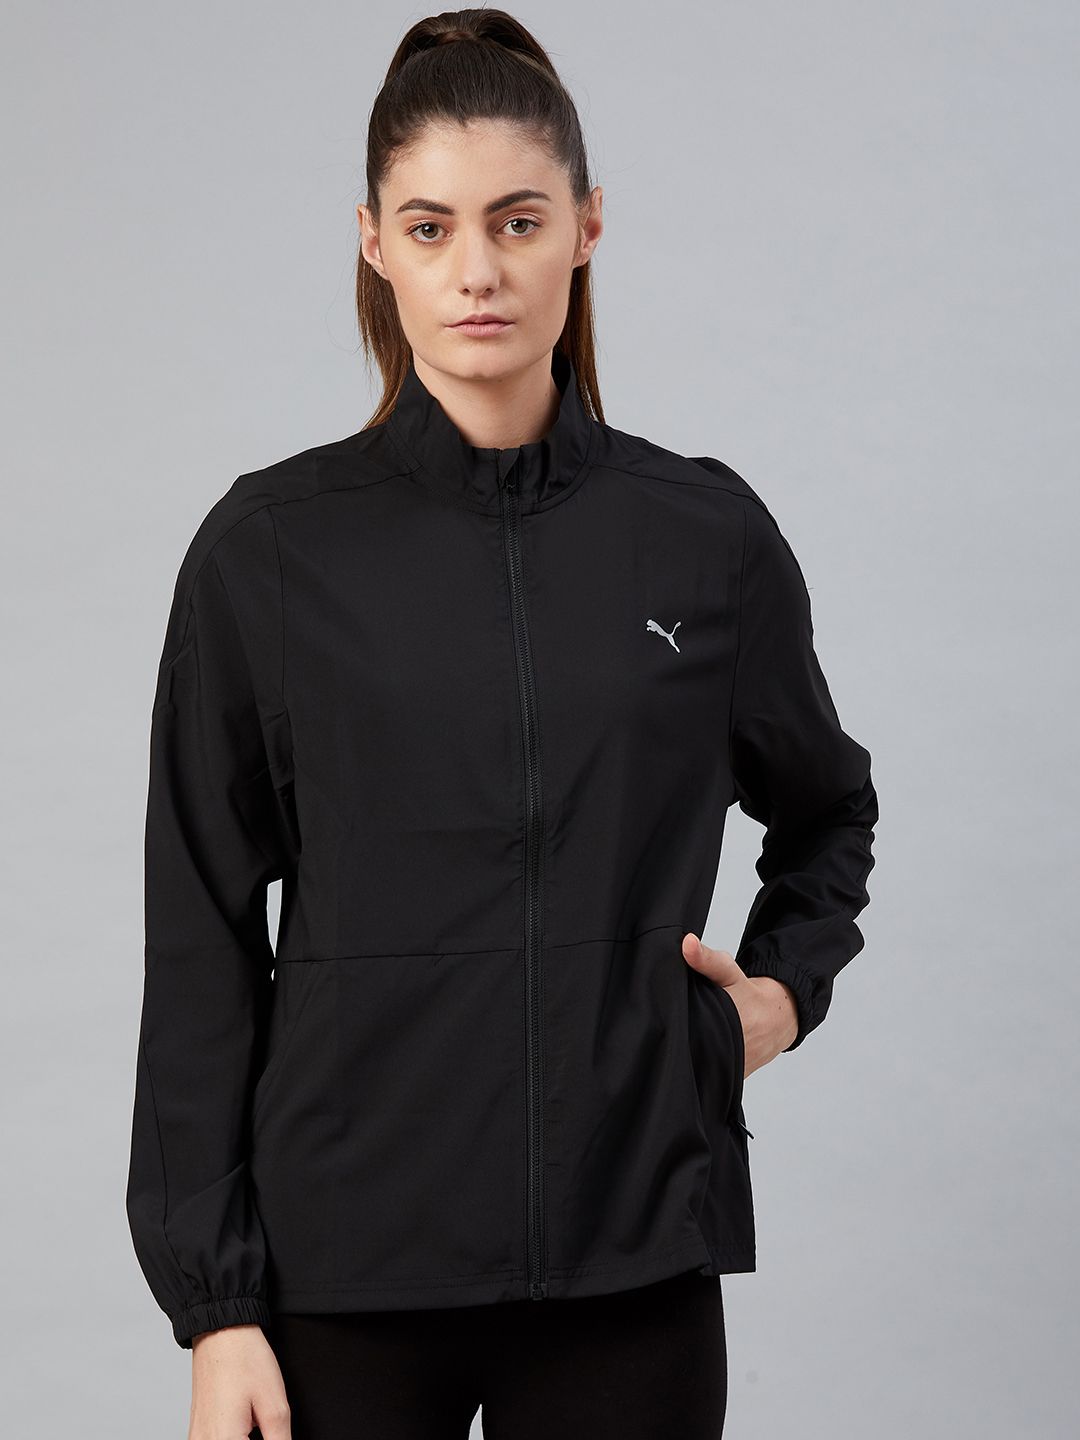 Puma Women Black Solid Favourite Woven Running Jacket Price in India